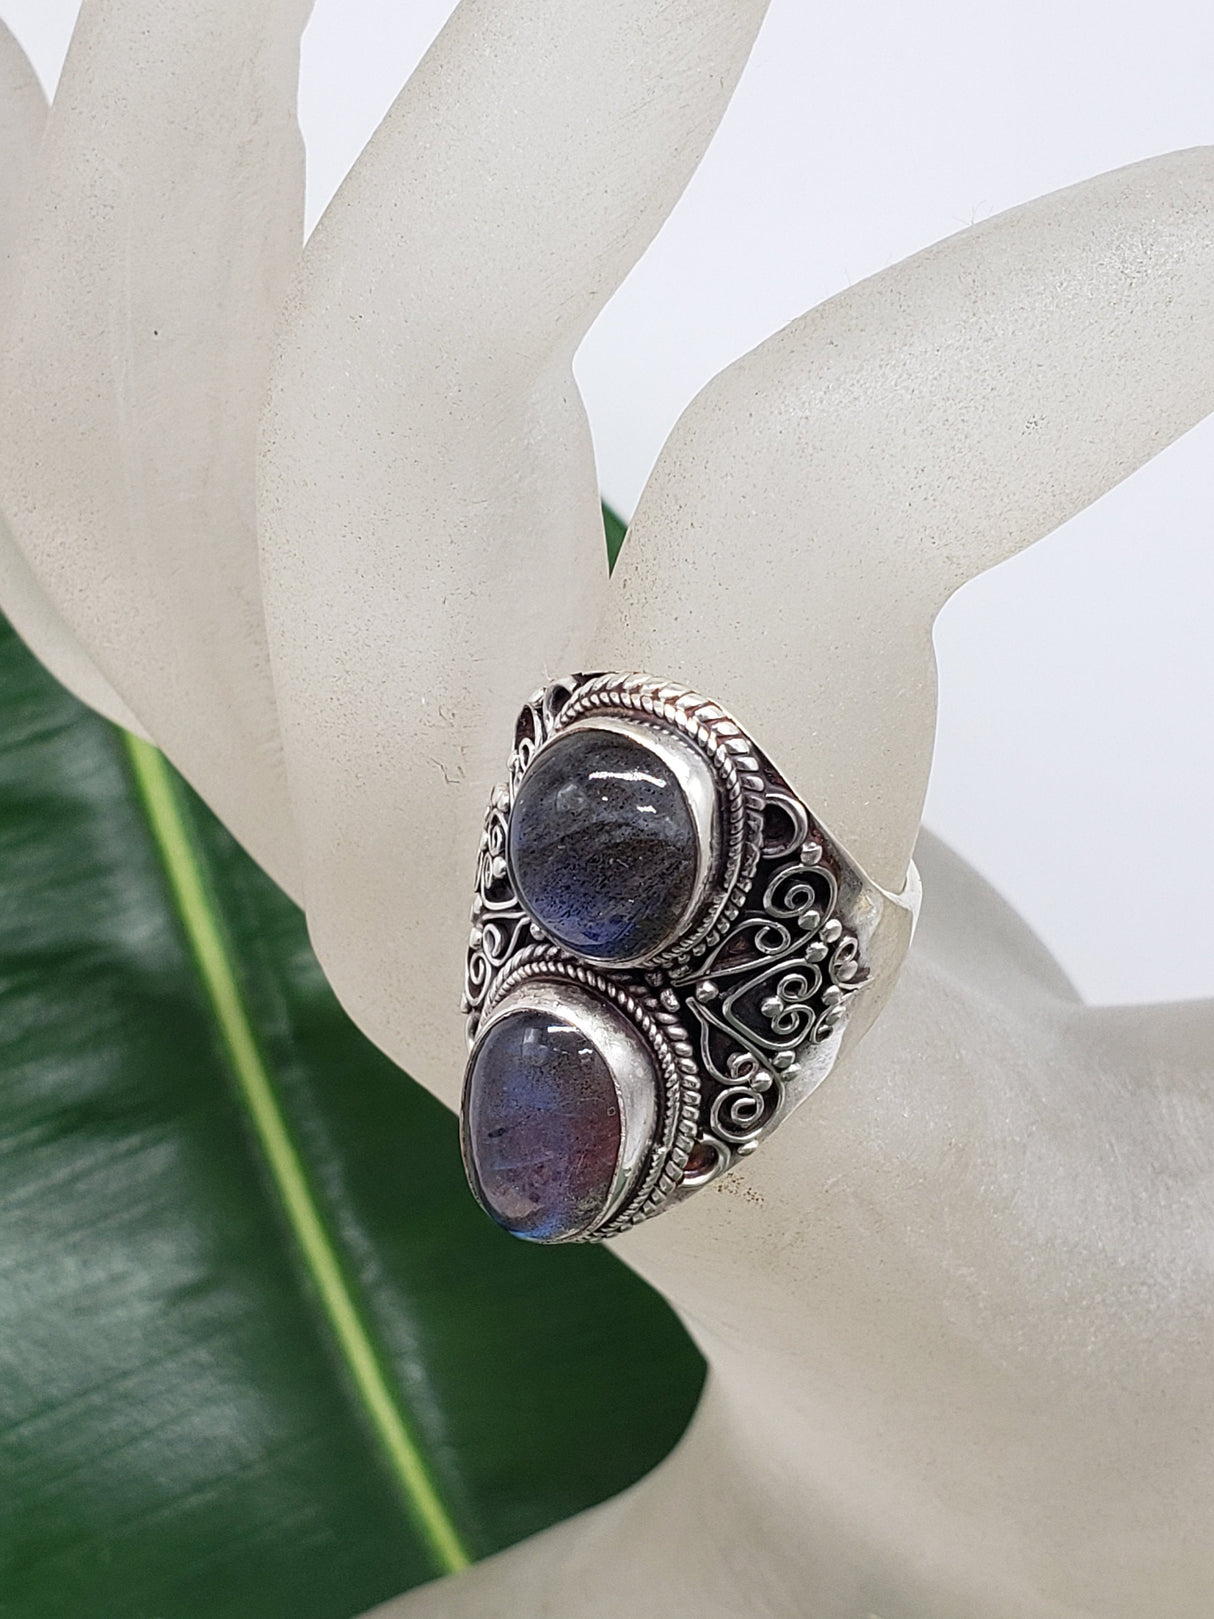 Artistic Hand crafted Starling silver ring with gemstone labradorite - Khusi 